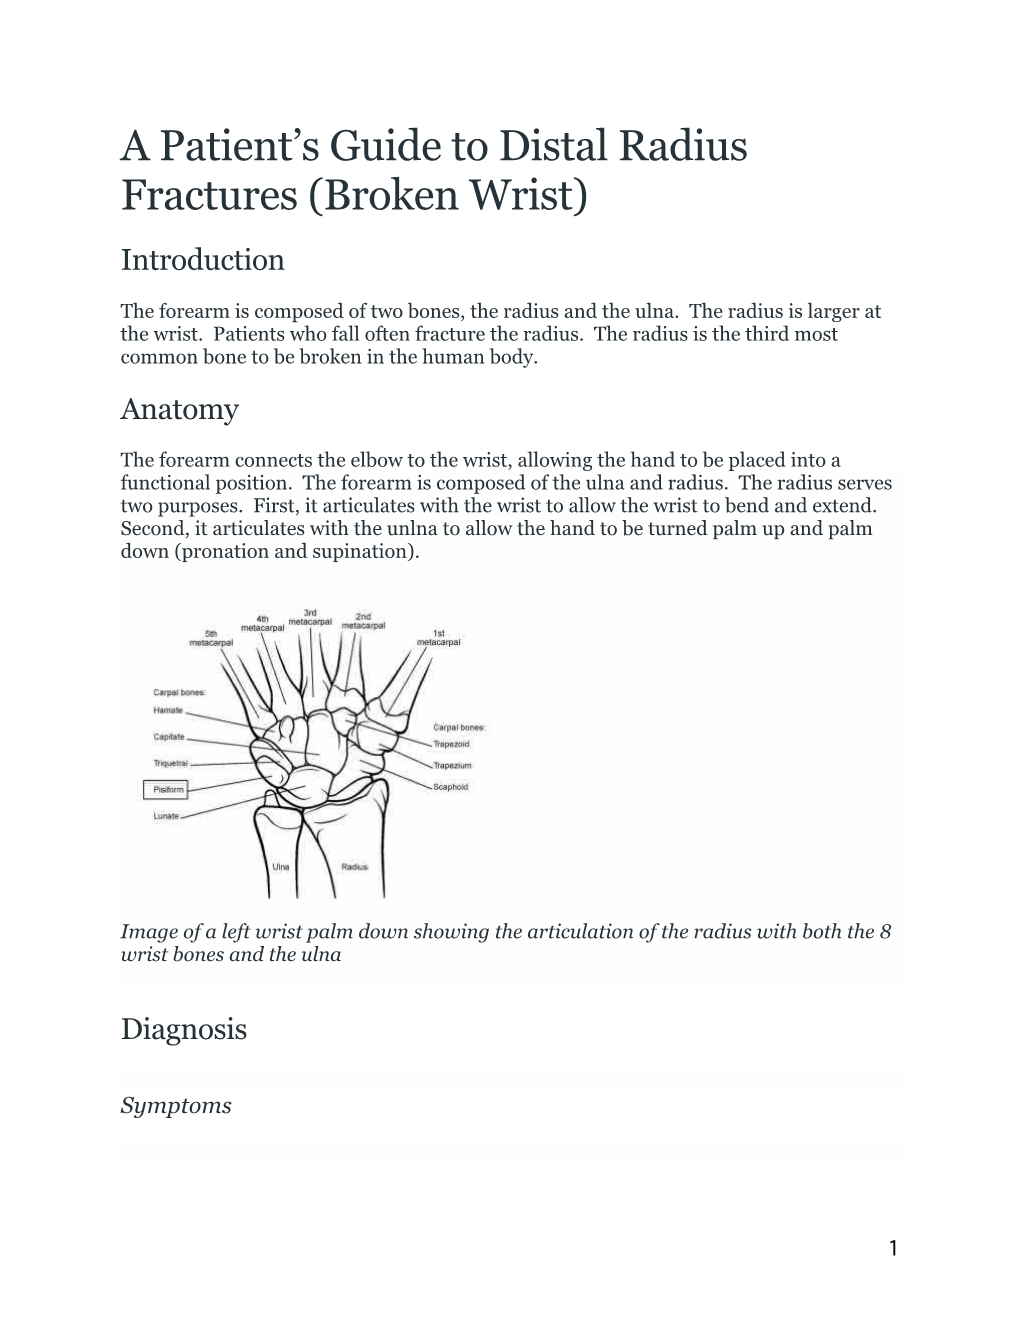 A Patient's Guide to Distal Radius Fractures